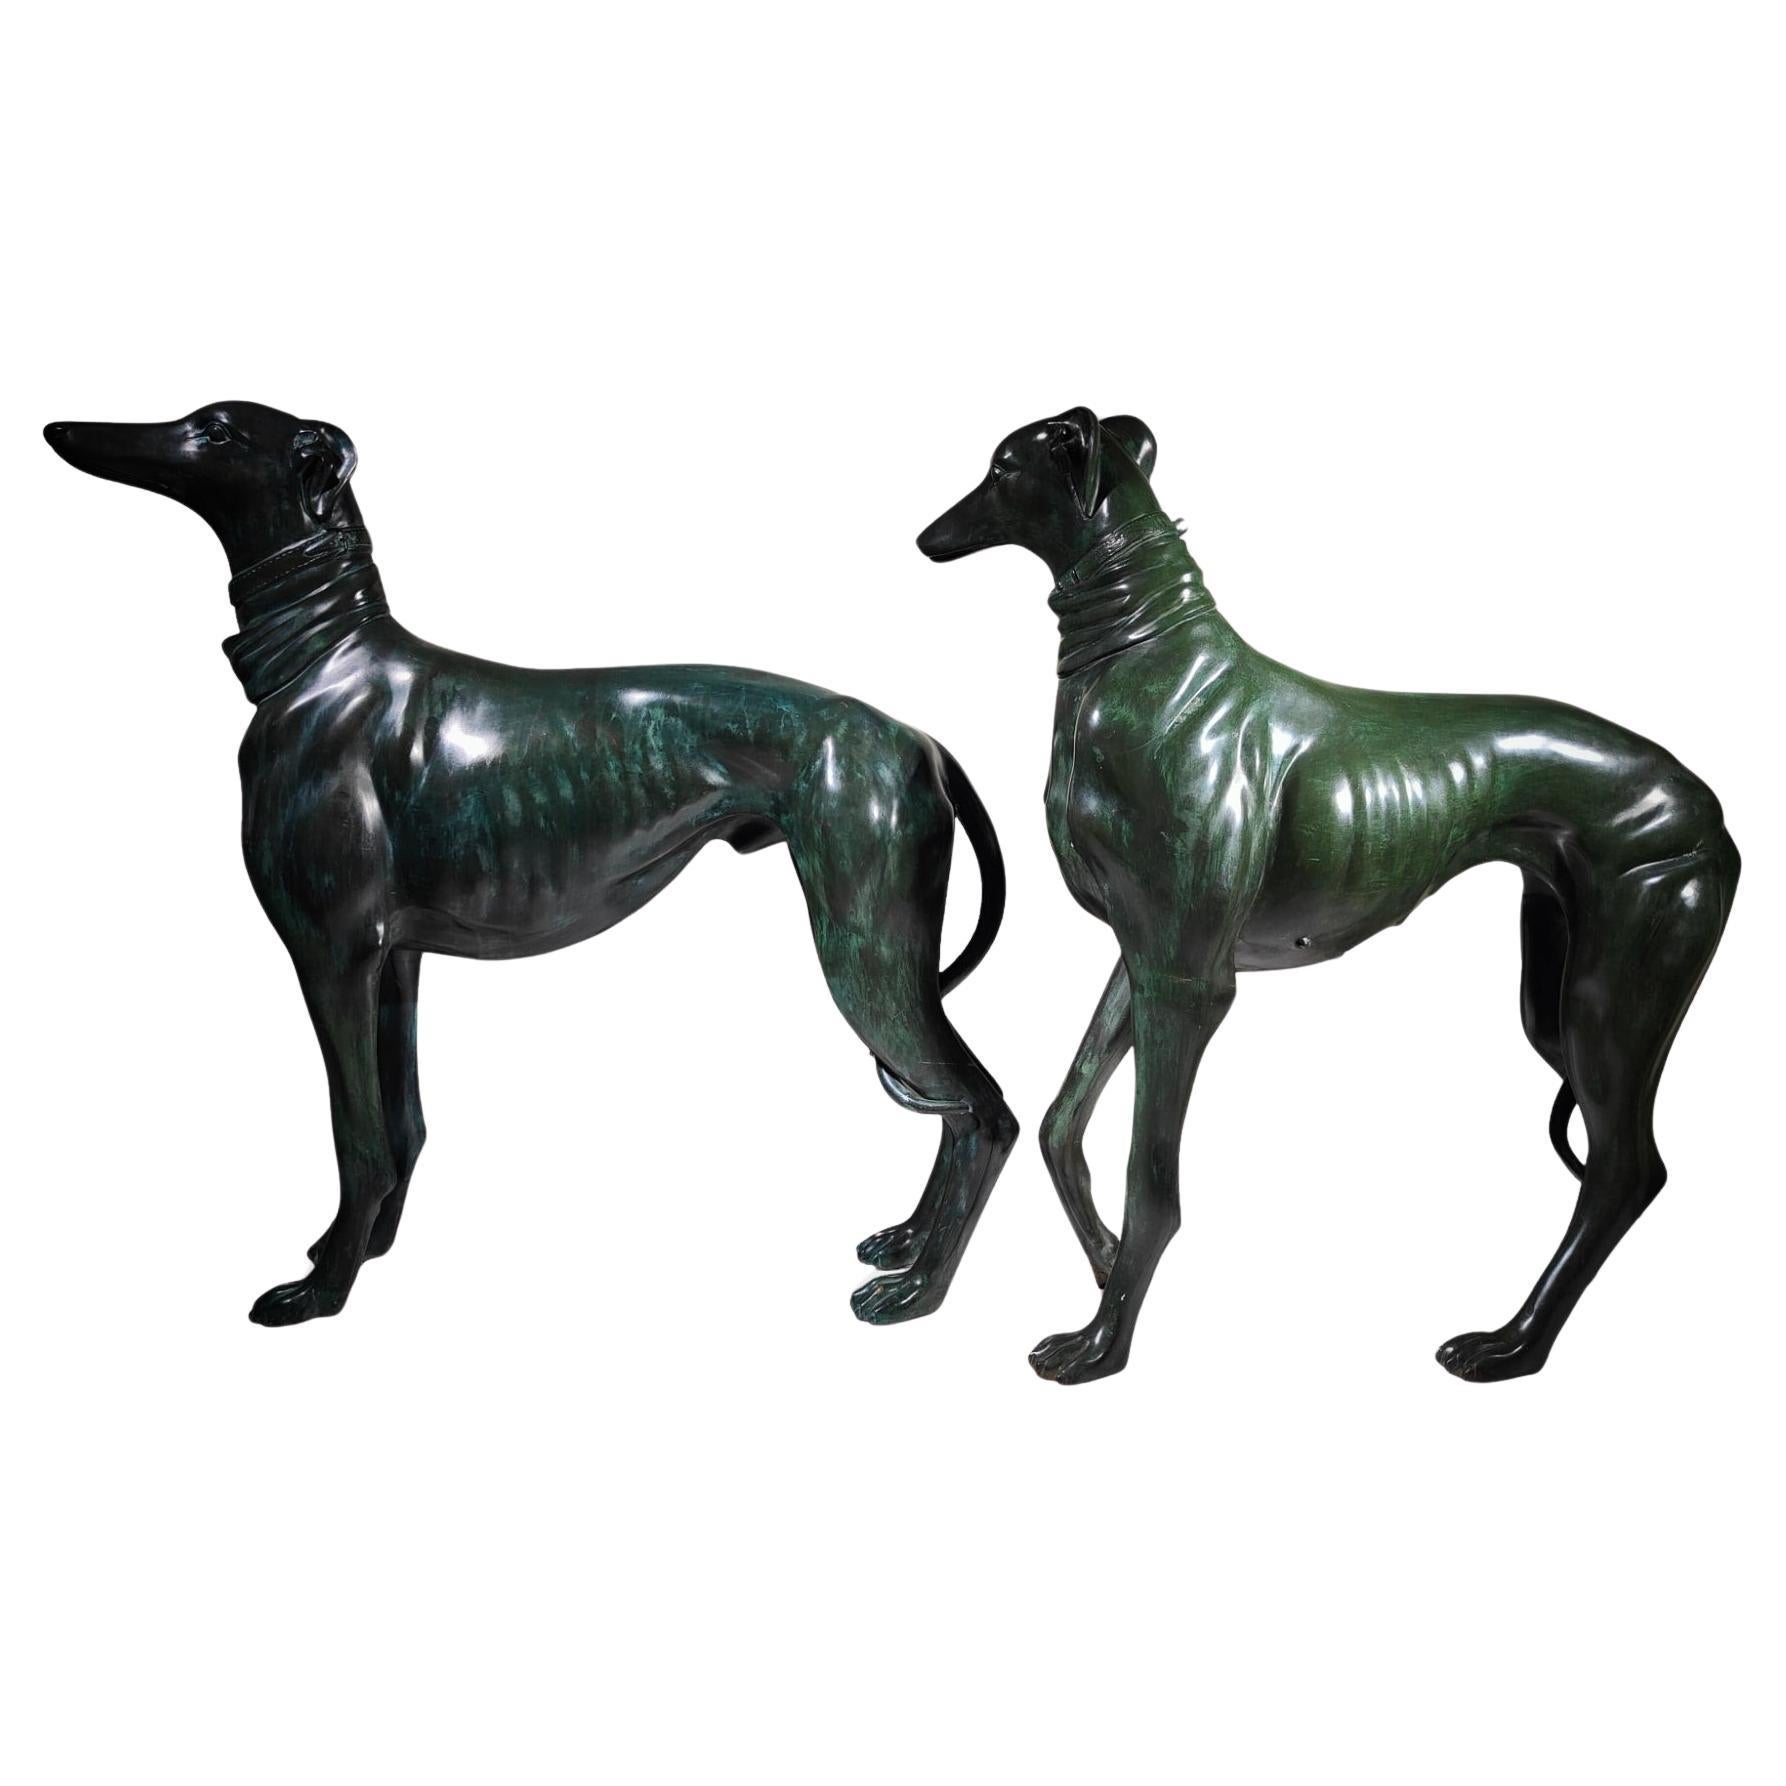 Pair of life-size bronze greyhound dogs